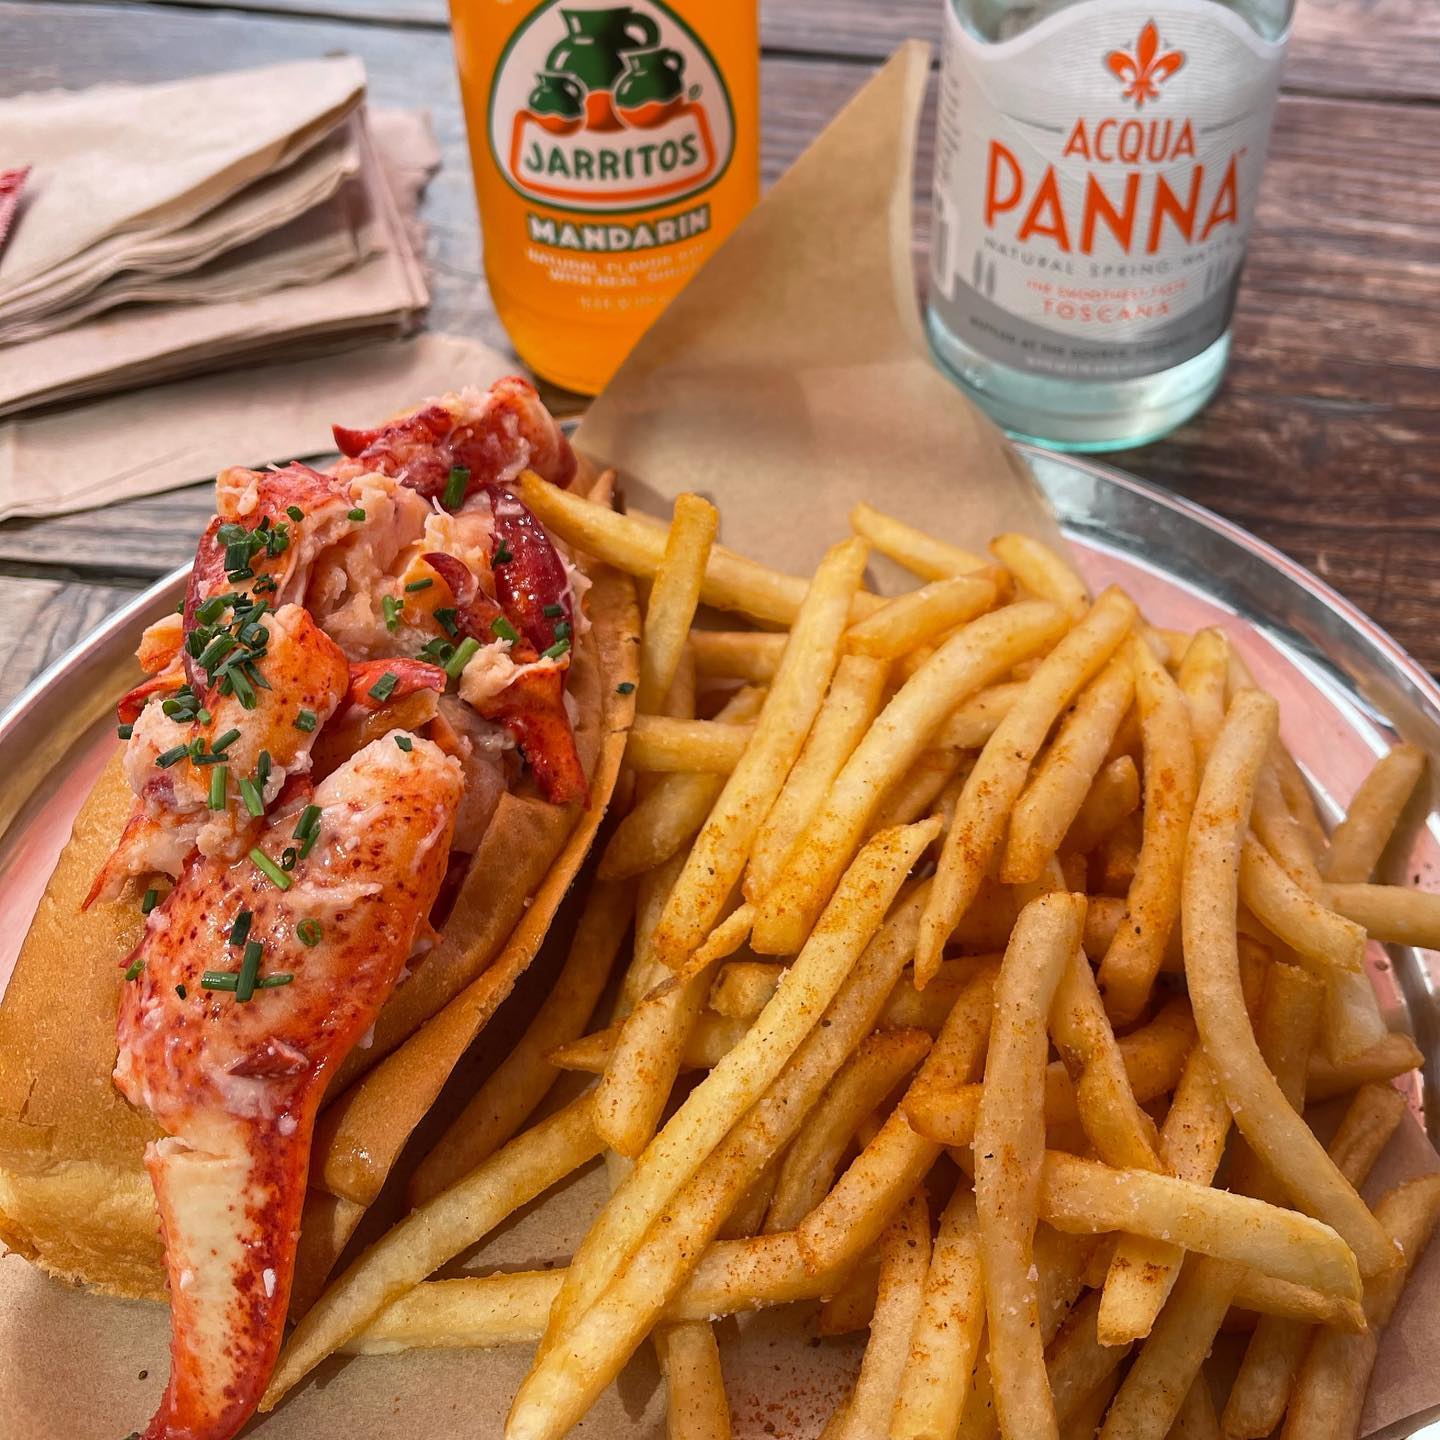 #TastyTuesday: @TheAlbright on the Santa Monica Pier has a relaxed seaside setting that is a perfect compliment to sustainably caught seafood and locally sourced ingredients.🦞❤️  📸: @blissfulbites615
.
.
.
#seasideonthepier #santamonicapier #santamonica #seafoodie #seafood #foodies #foodie #foodiesofinstagram #treatyoself